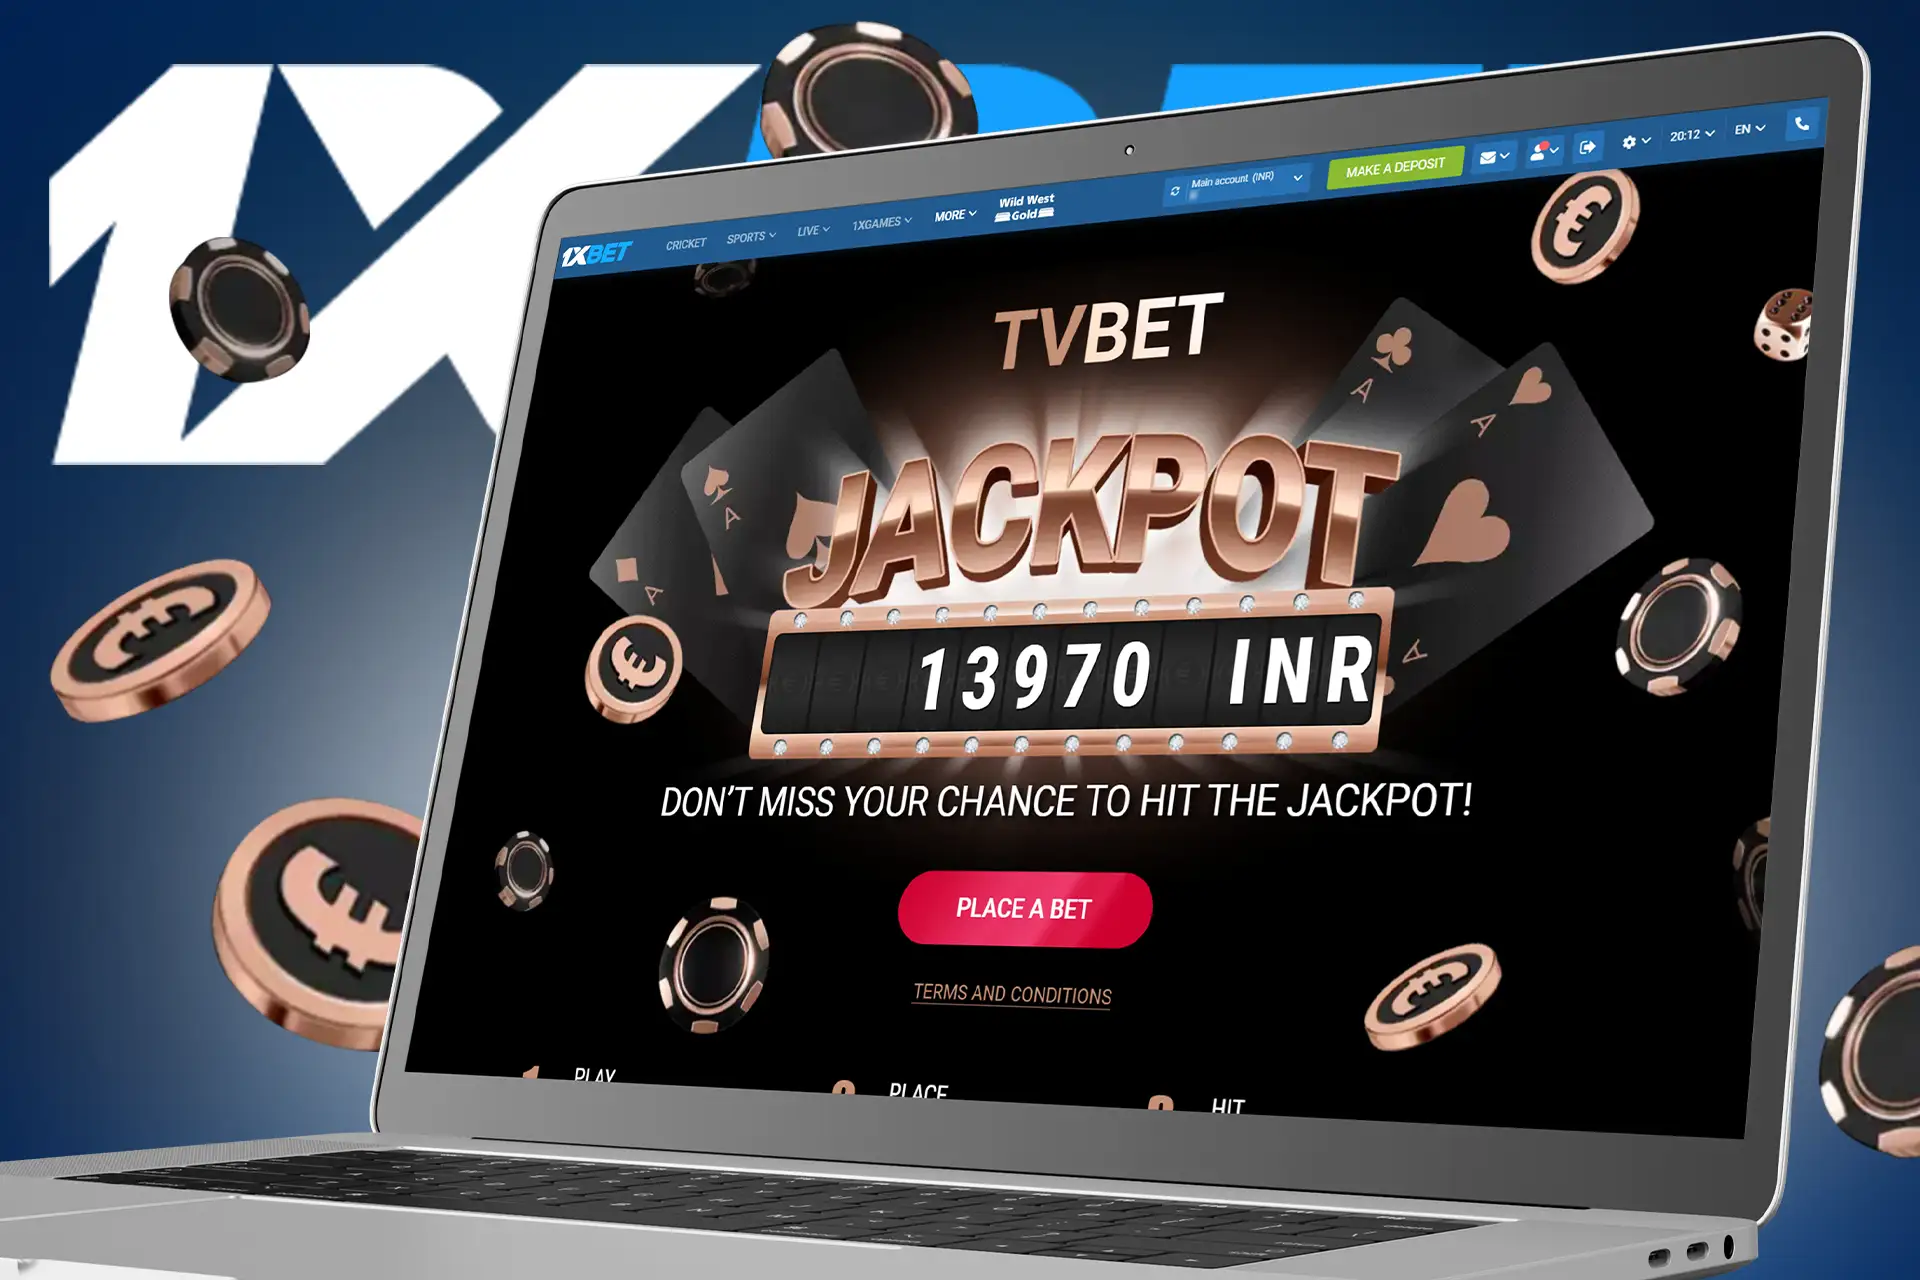 Play TVBet and try to collect the jackpot.